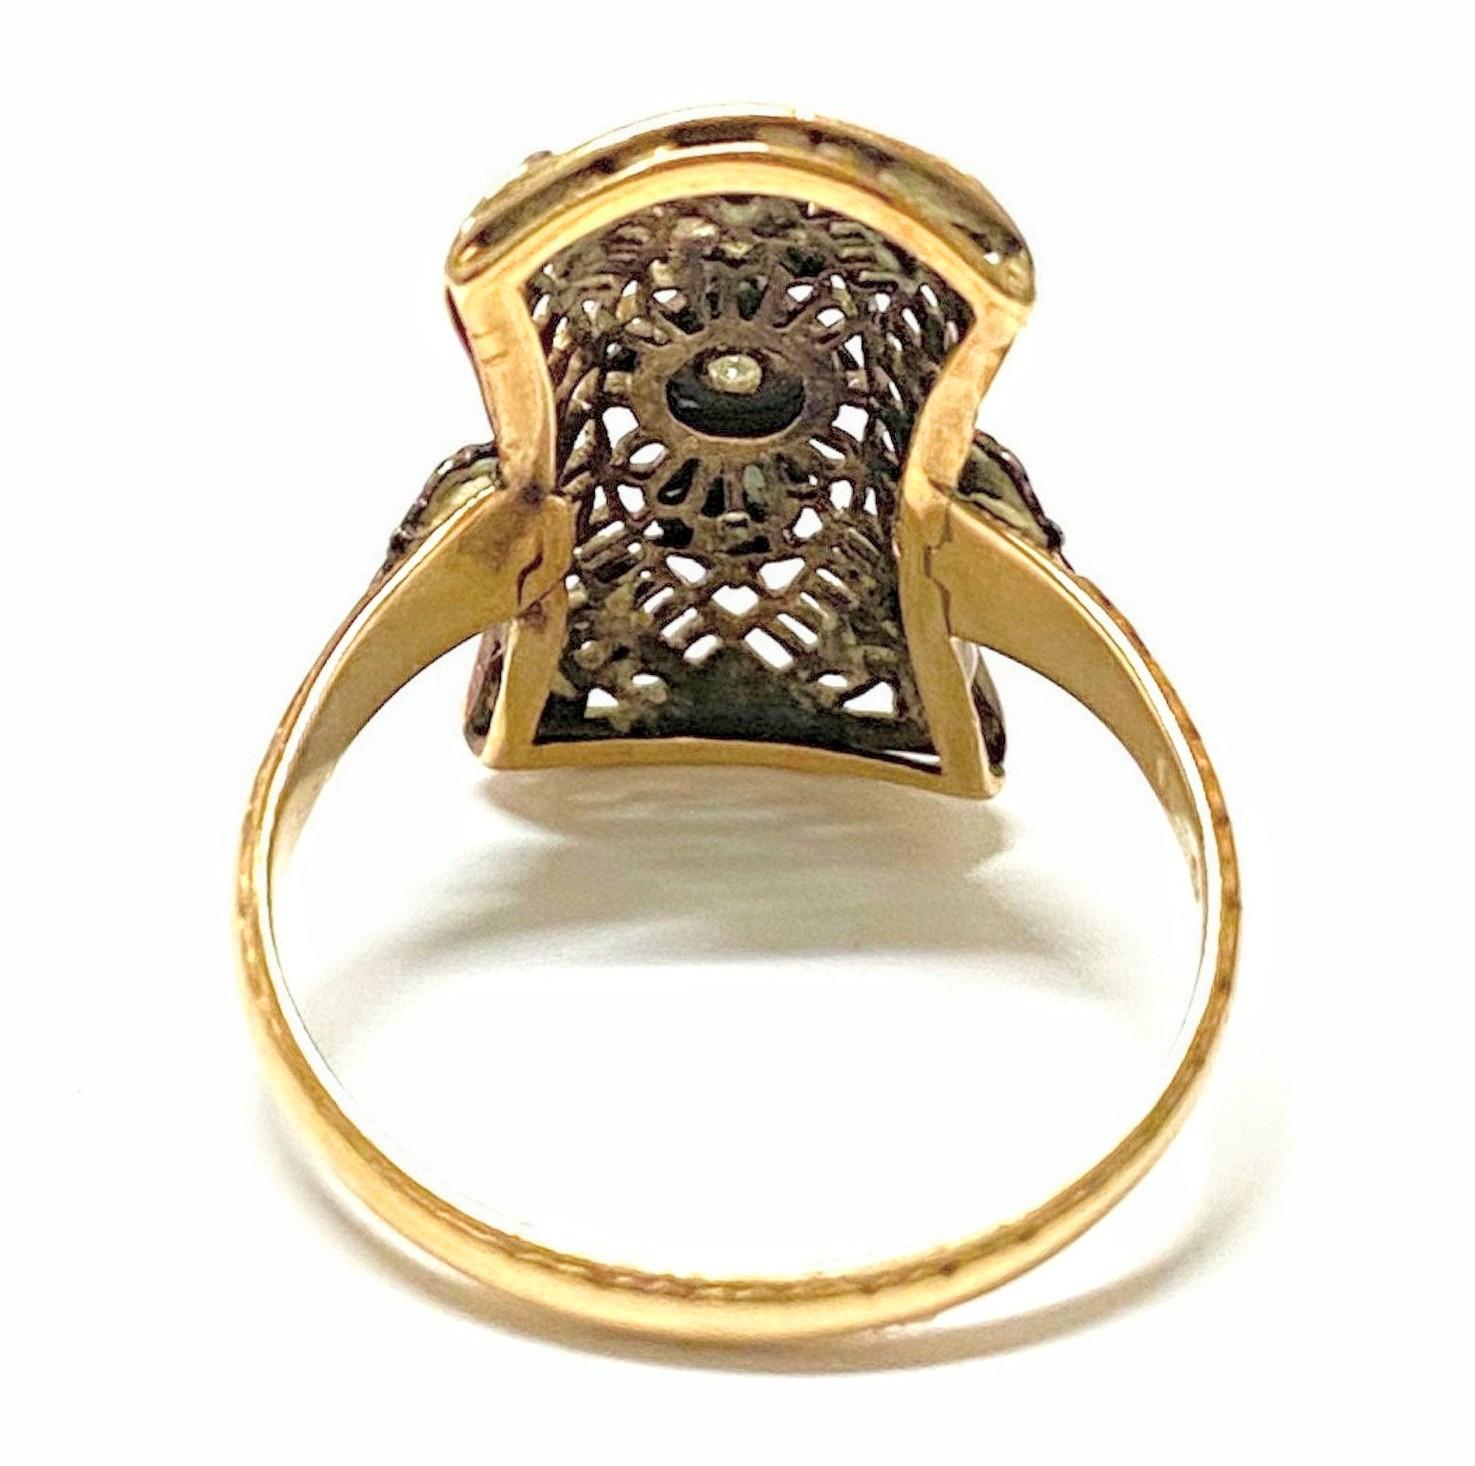 Art Deco Style Navette Diamond Shield Cocktail Ring 14K Yellow & White Gold Size 6

Metal: 14k Gold
Weight: 2.32 grams
Diamonds: 10 single cut round diamonds, approx .07 ctw H-I VS 
Size: 6
Ring top measures approx. 18mm x 10.7mm
Band measures 1.9mm